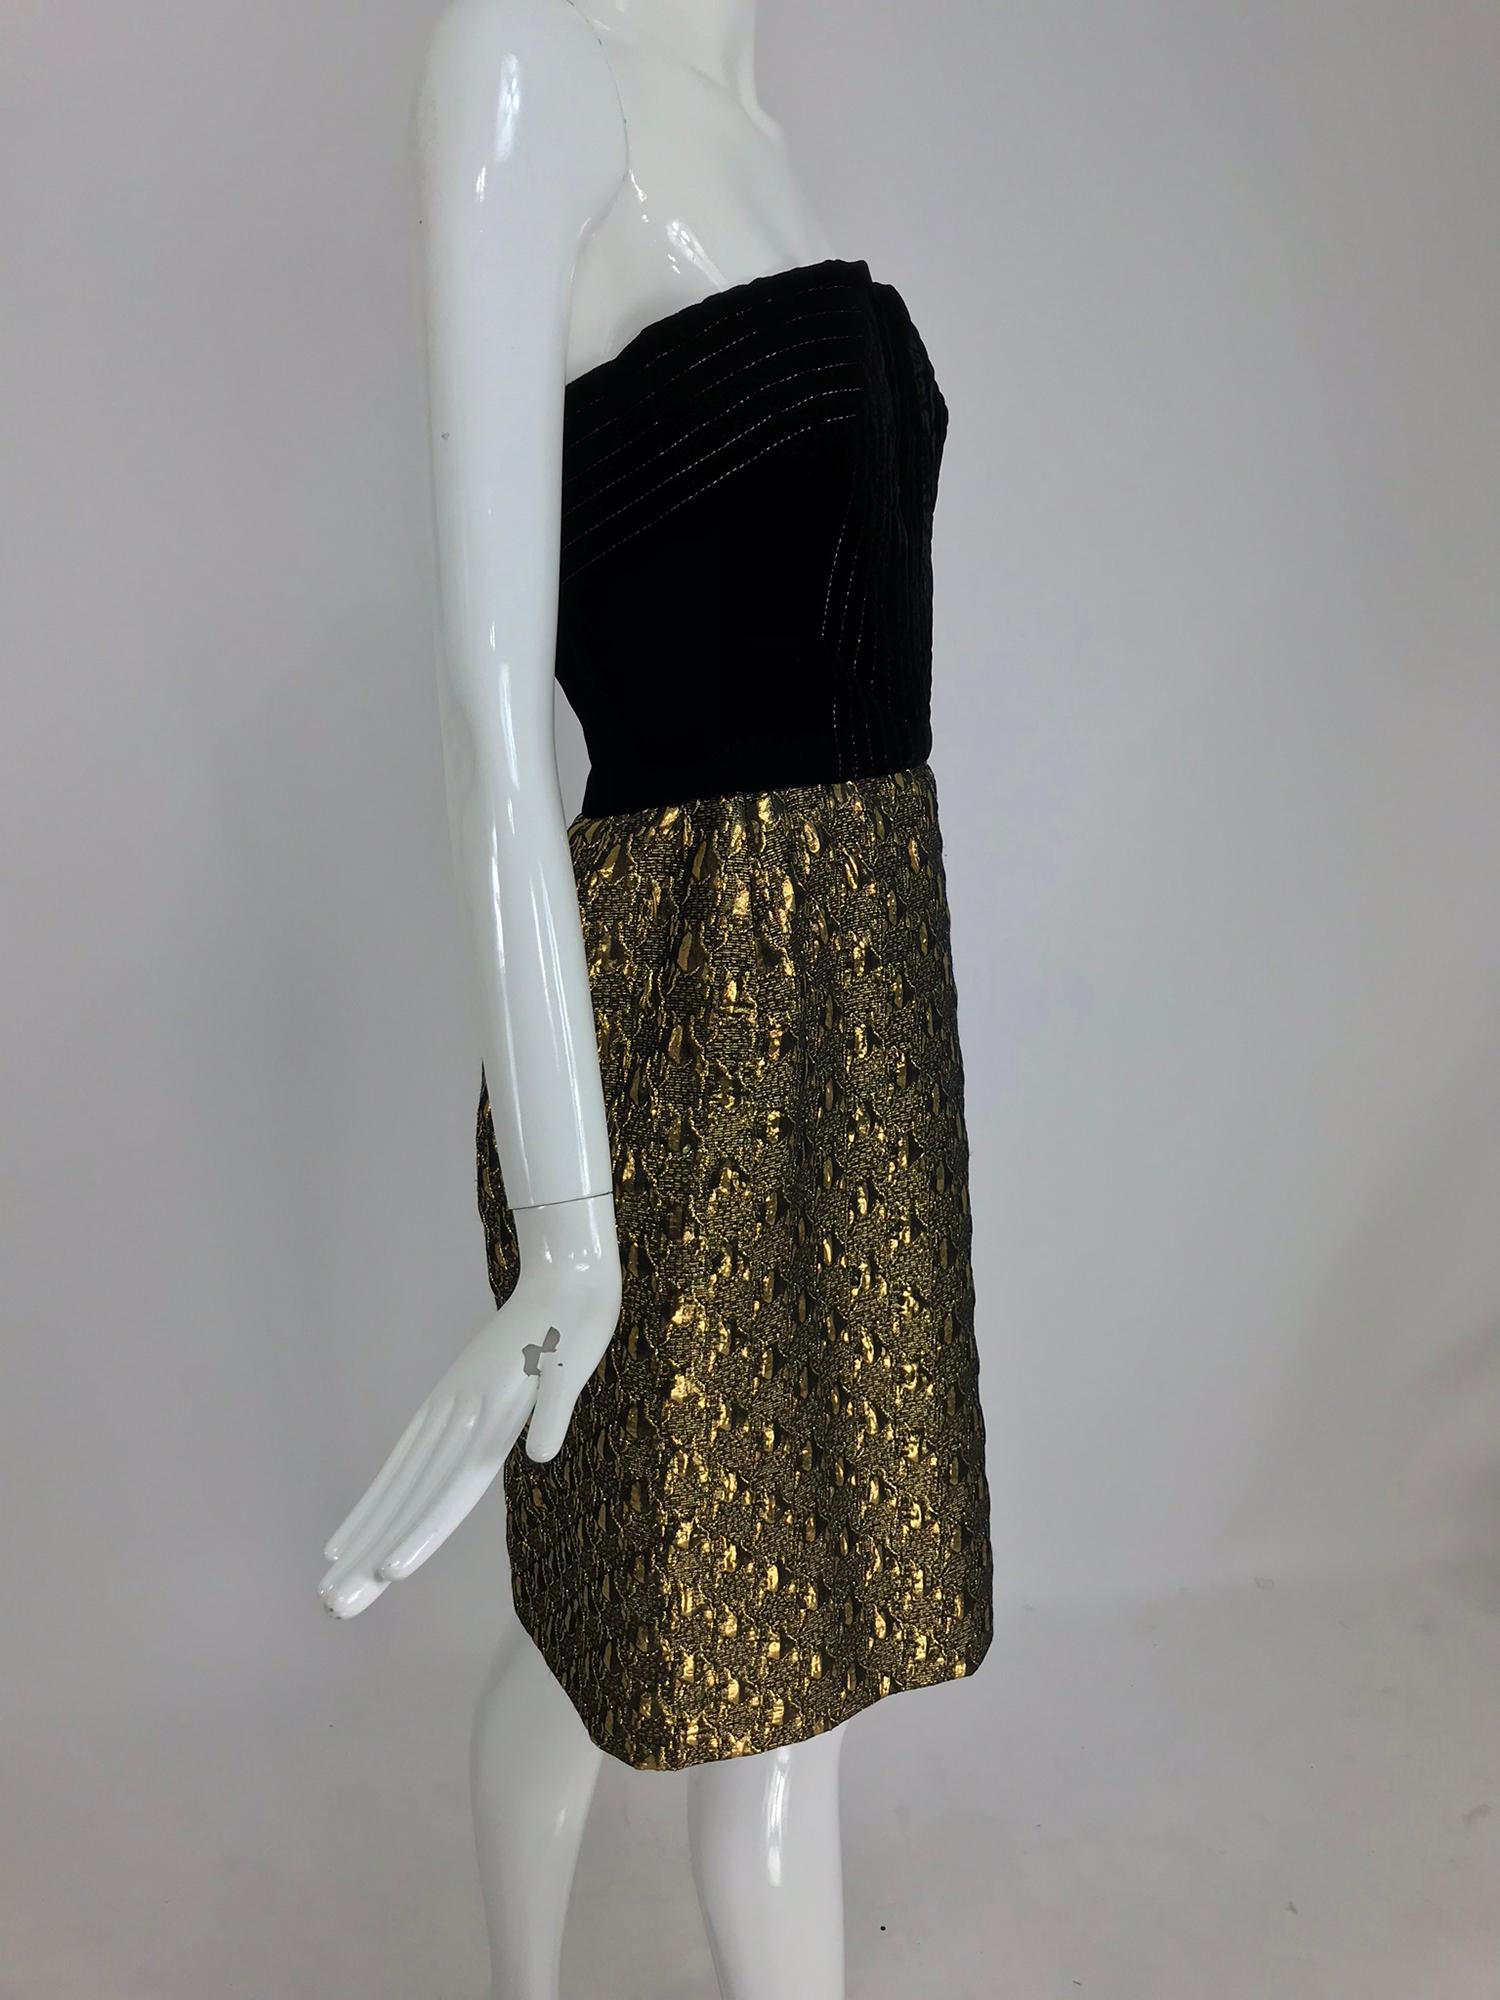 Jacqueline de Ribes gold metallic and black velvet strapless cocktail dress from the 1980s. Chic little cocktail dress with a black velvet bodice, the velvet is top stitched in gold, the center front vent accents the bust. Seamed waist with a